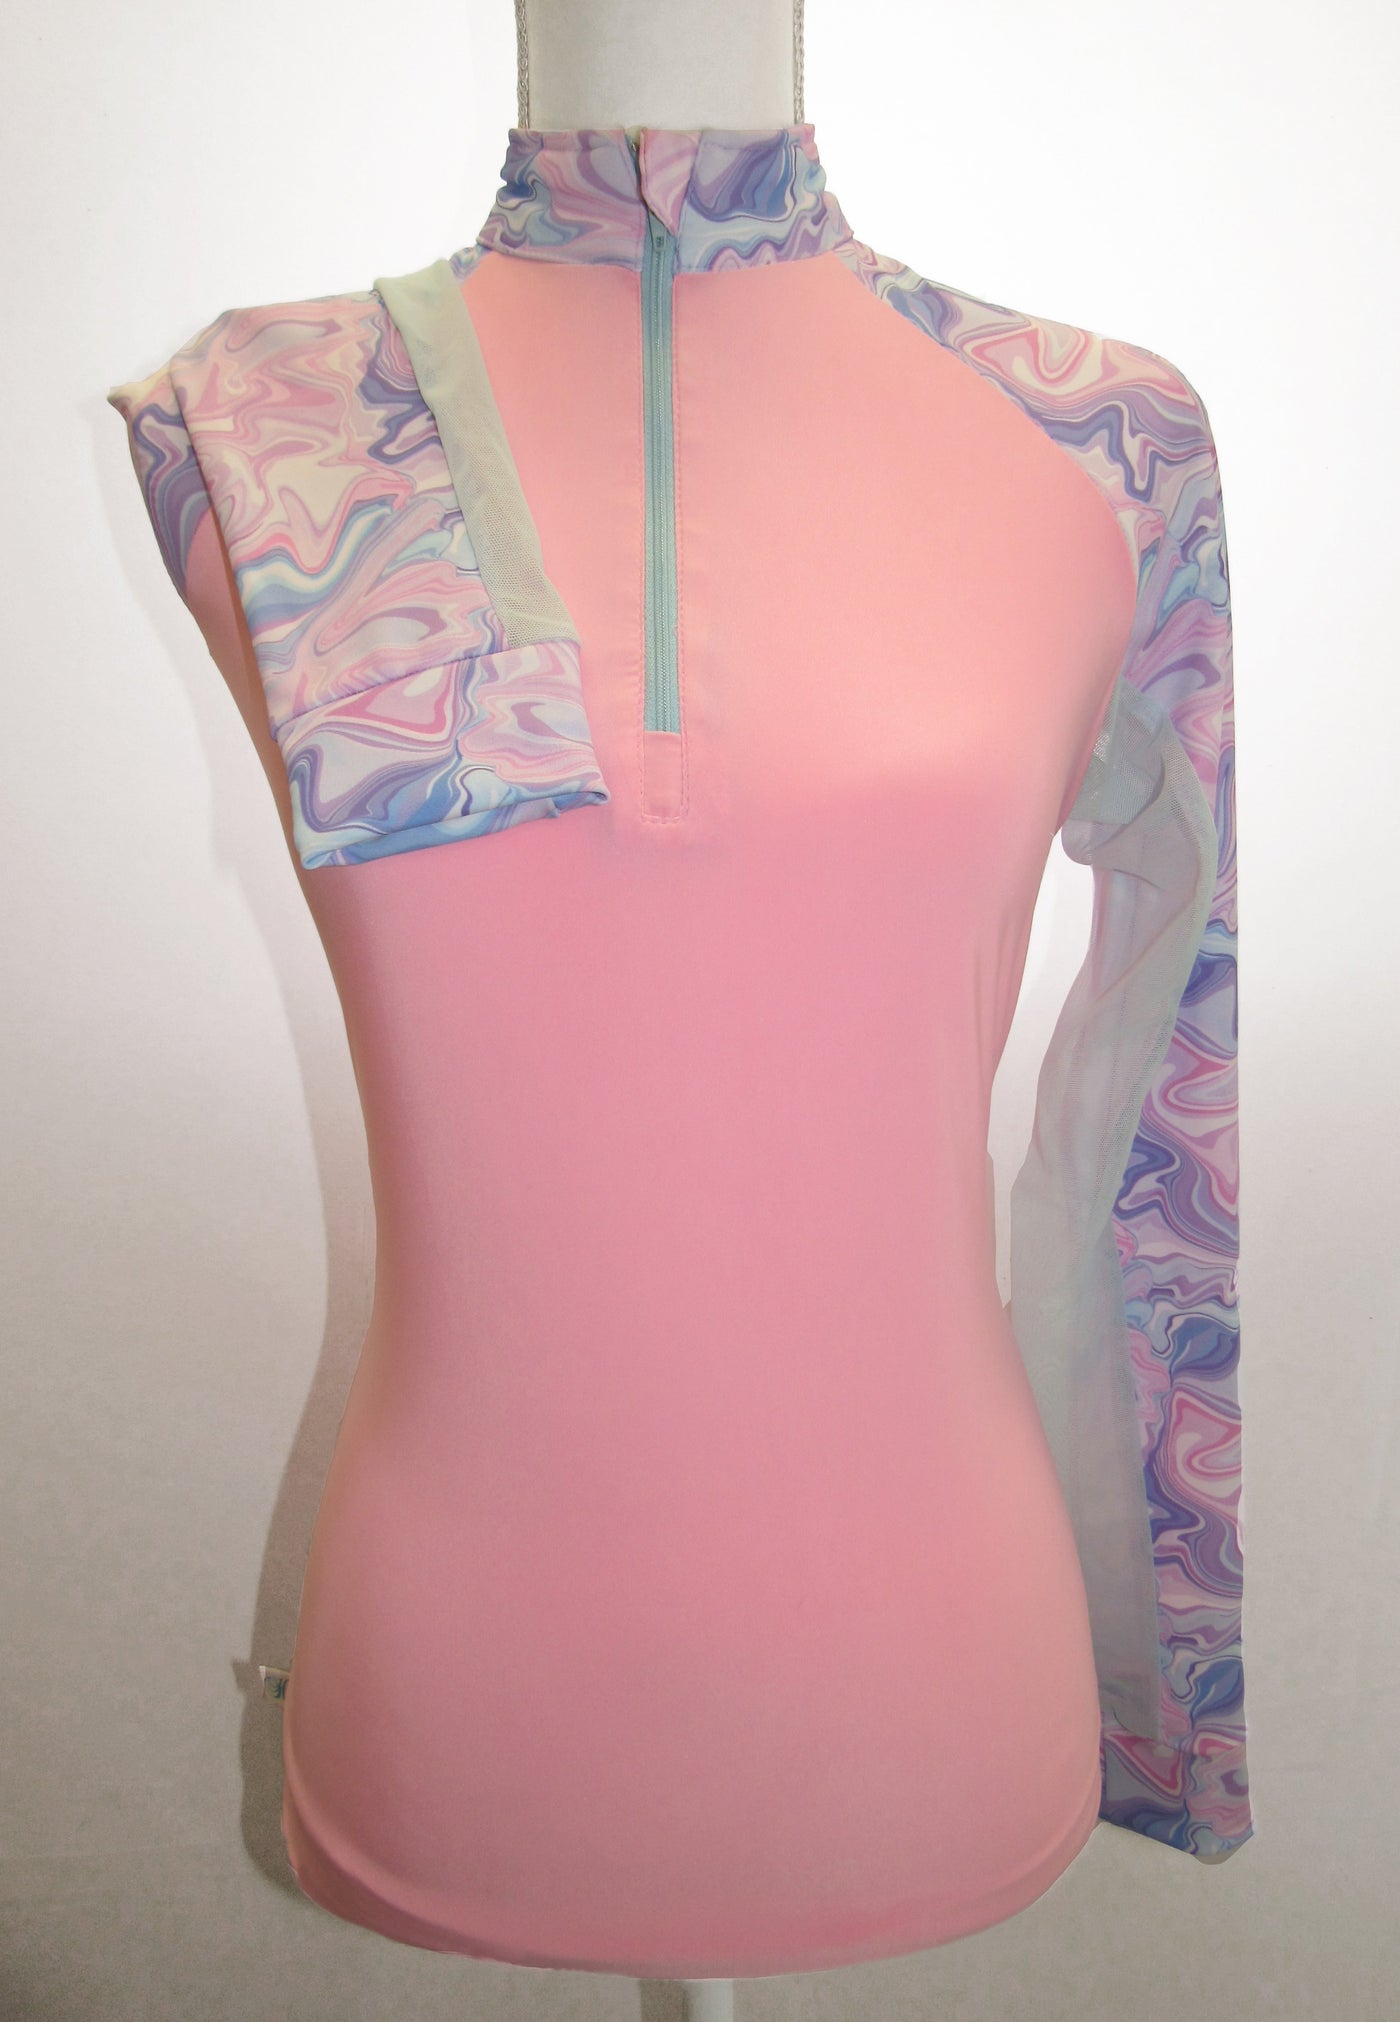 Pastel Color Choice Sunshirt with Swirl Pattern - Adult + Youth Sizes